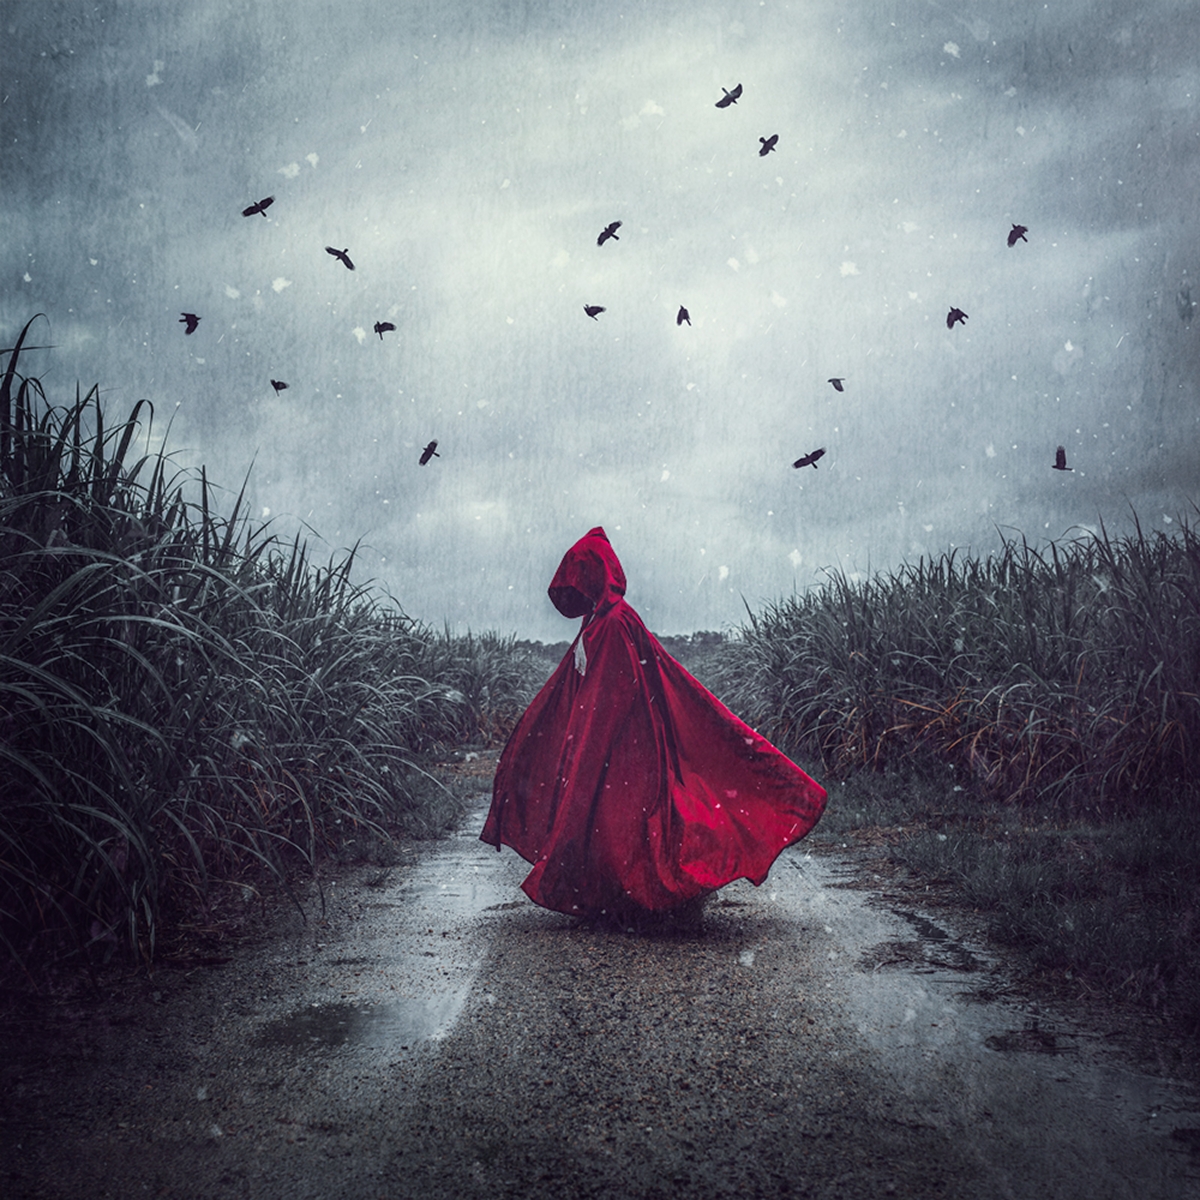 2021 Open Colour Section "The Girl In The Red Cloak" by Charli Savage: Awarded APS Gold Medal